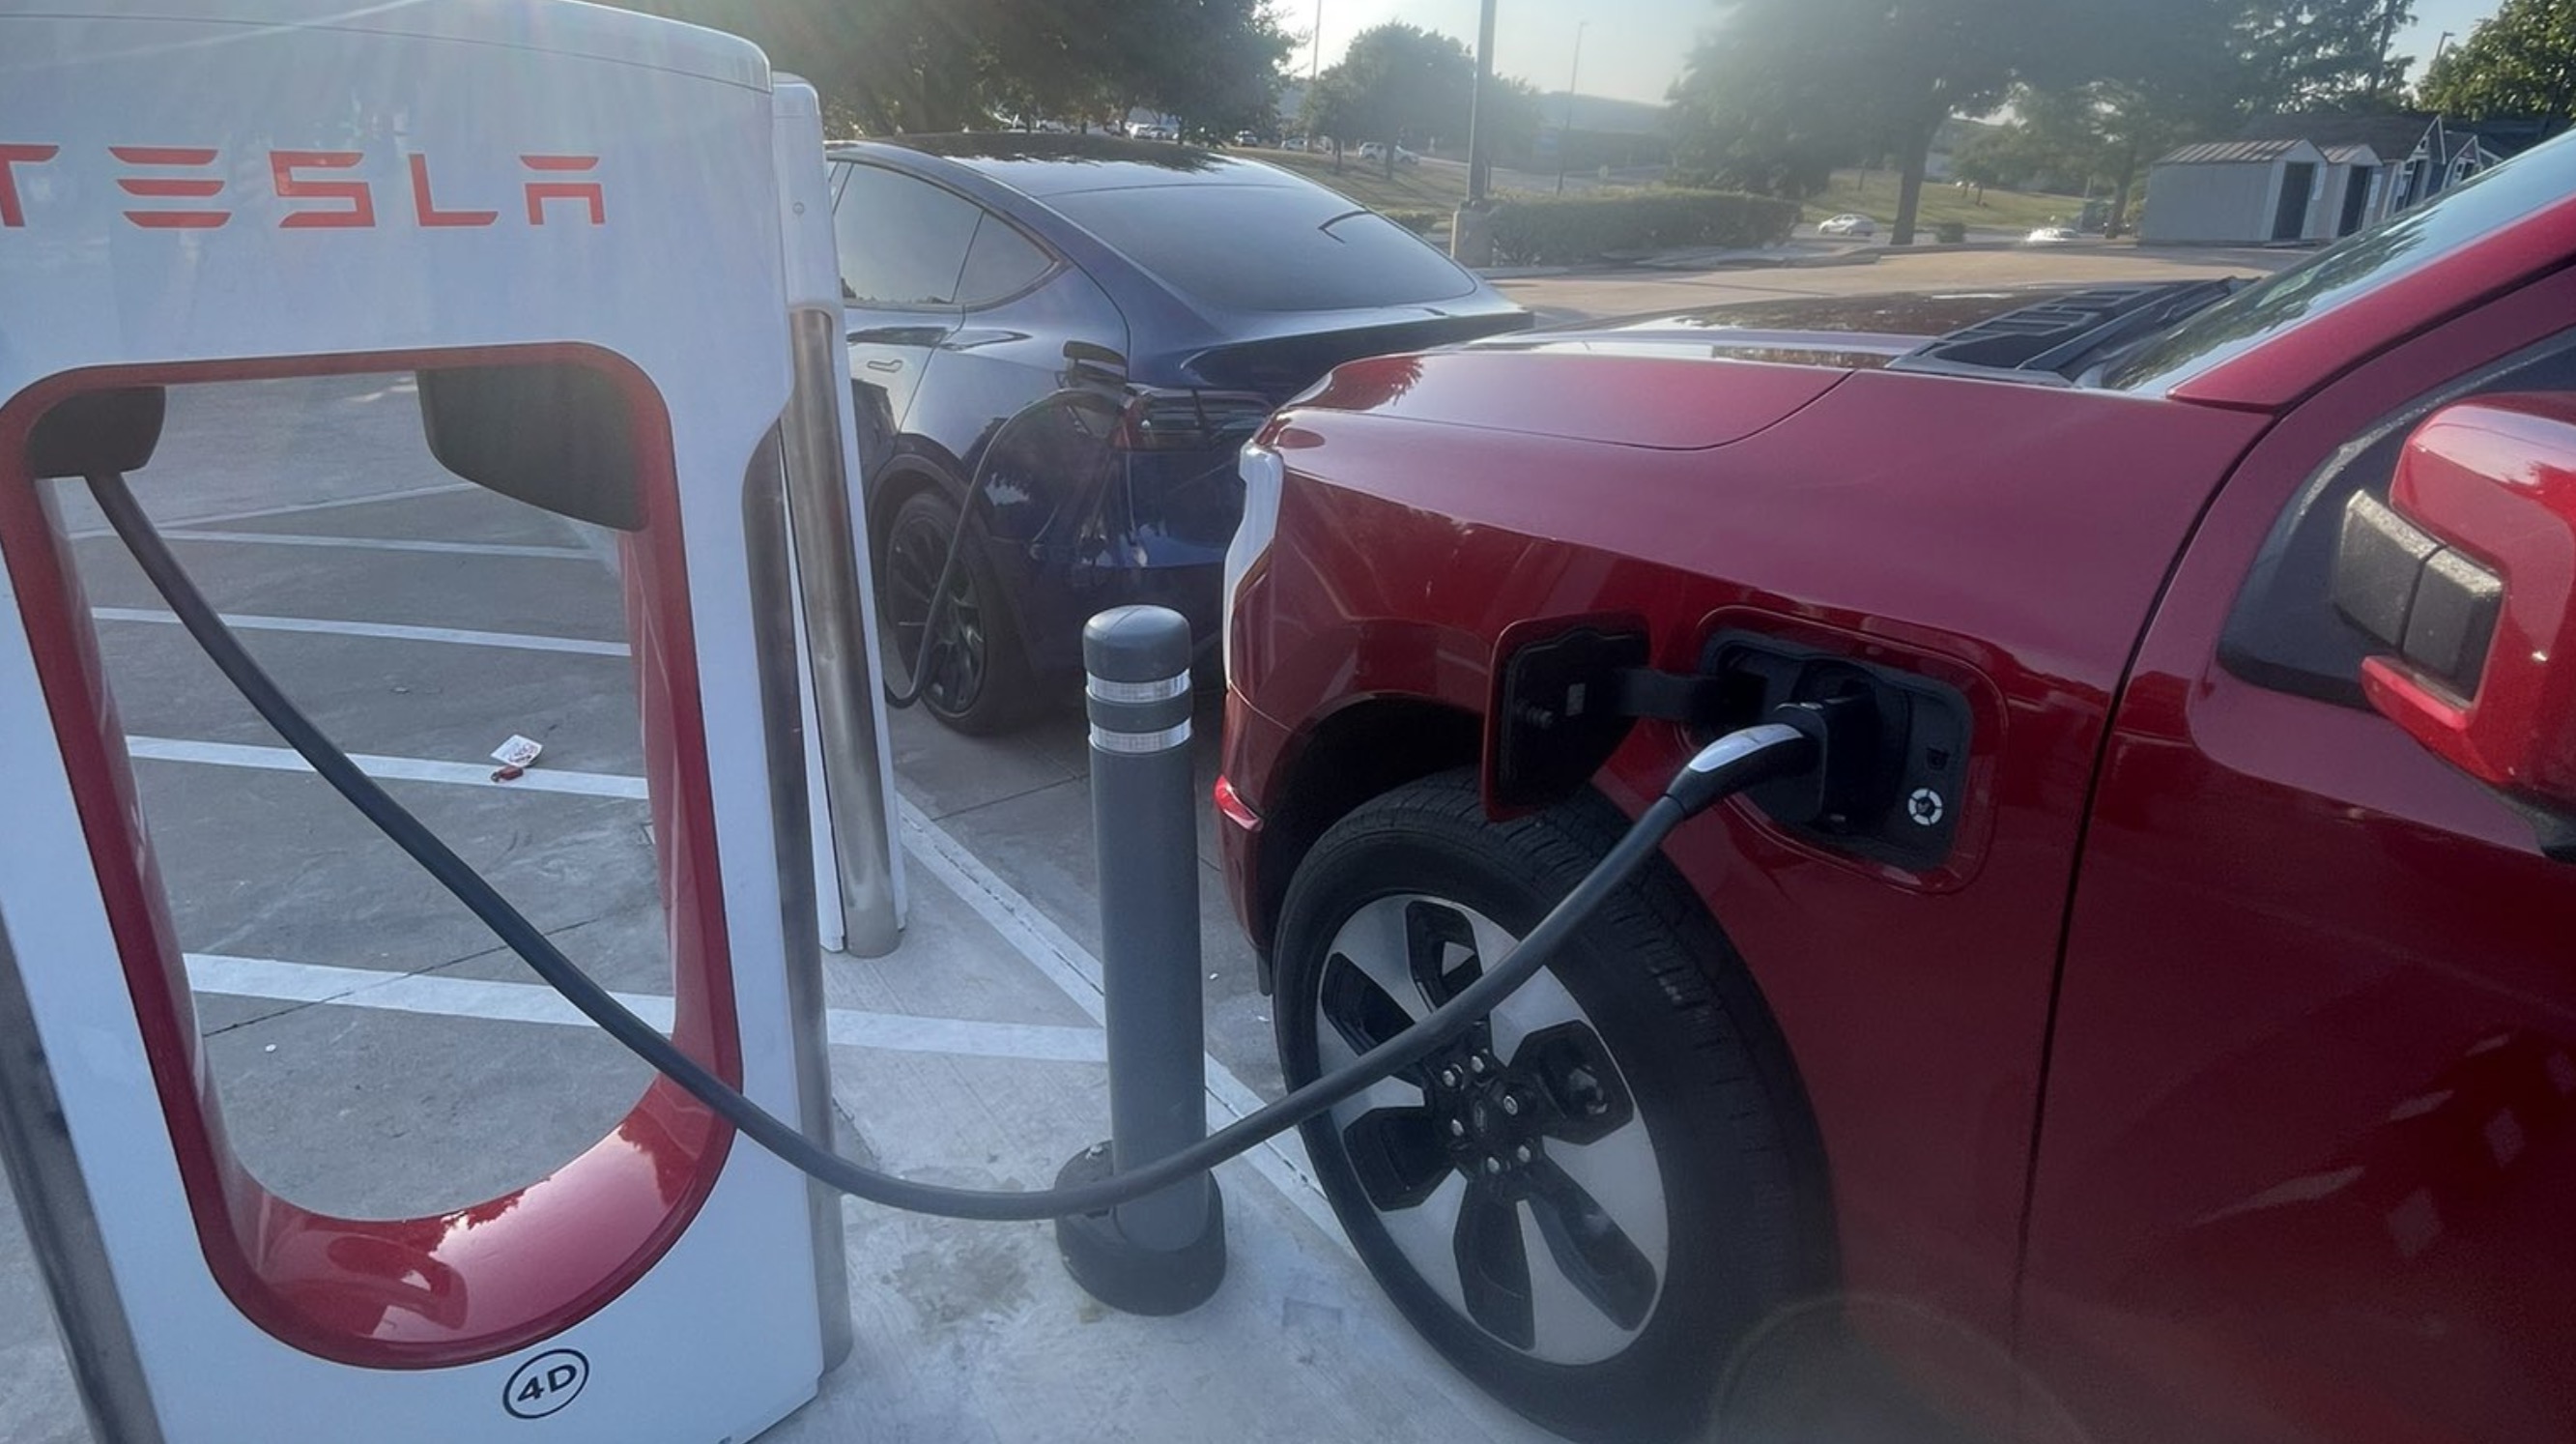 Tesla restarts deploying Magic Dock adapters at Superchargers in